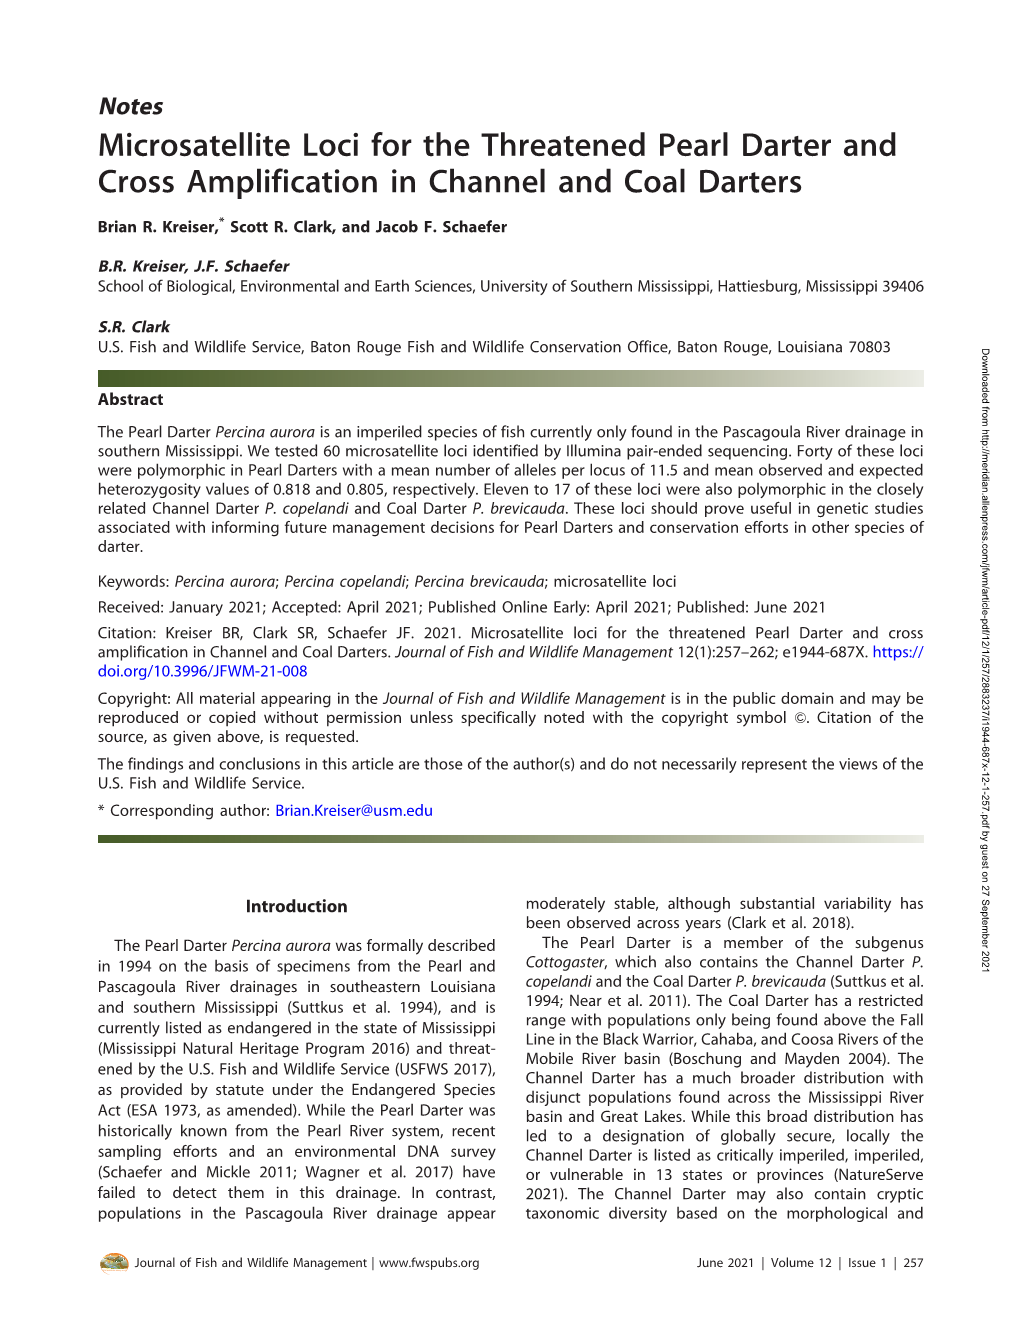 Microsatellite Loci for the Threatened Pearl Darter and Cross Amplification in Channel and Coal Darters